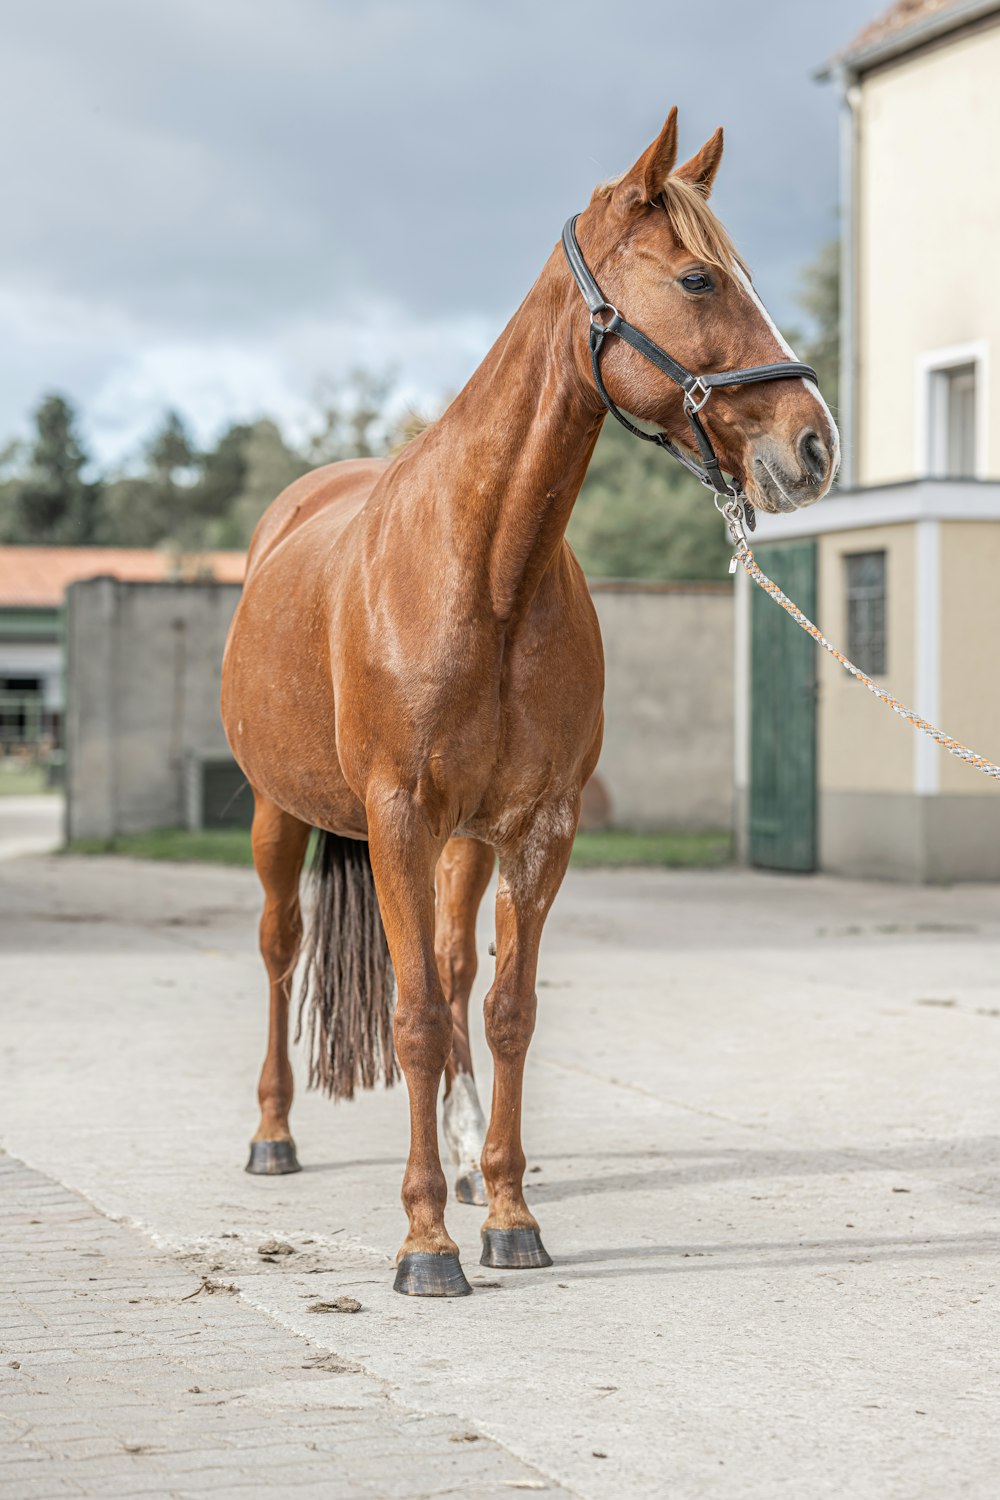 a horse standing on a concrete surface